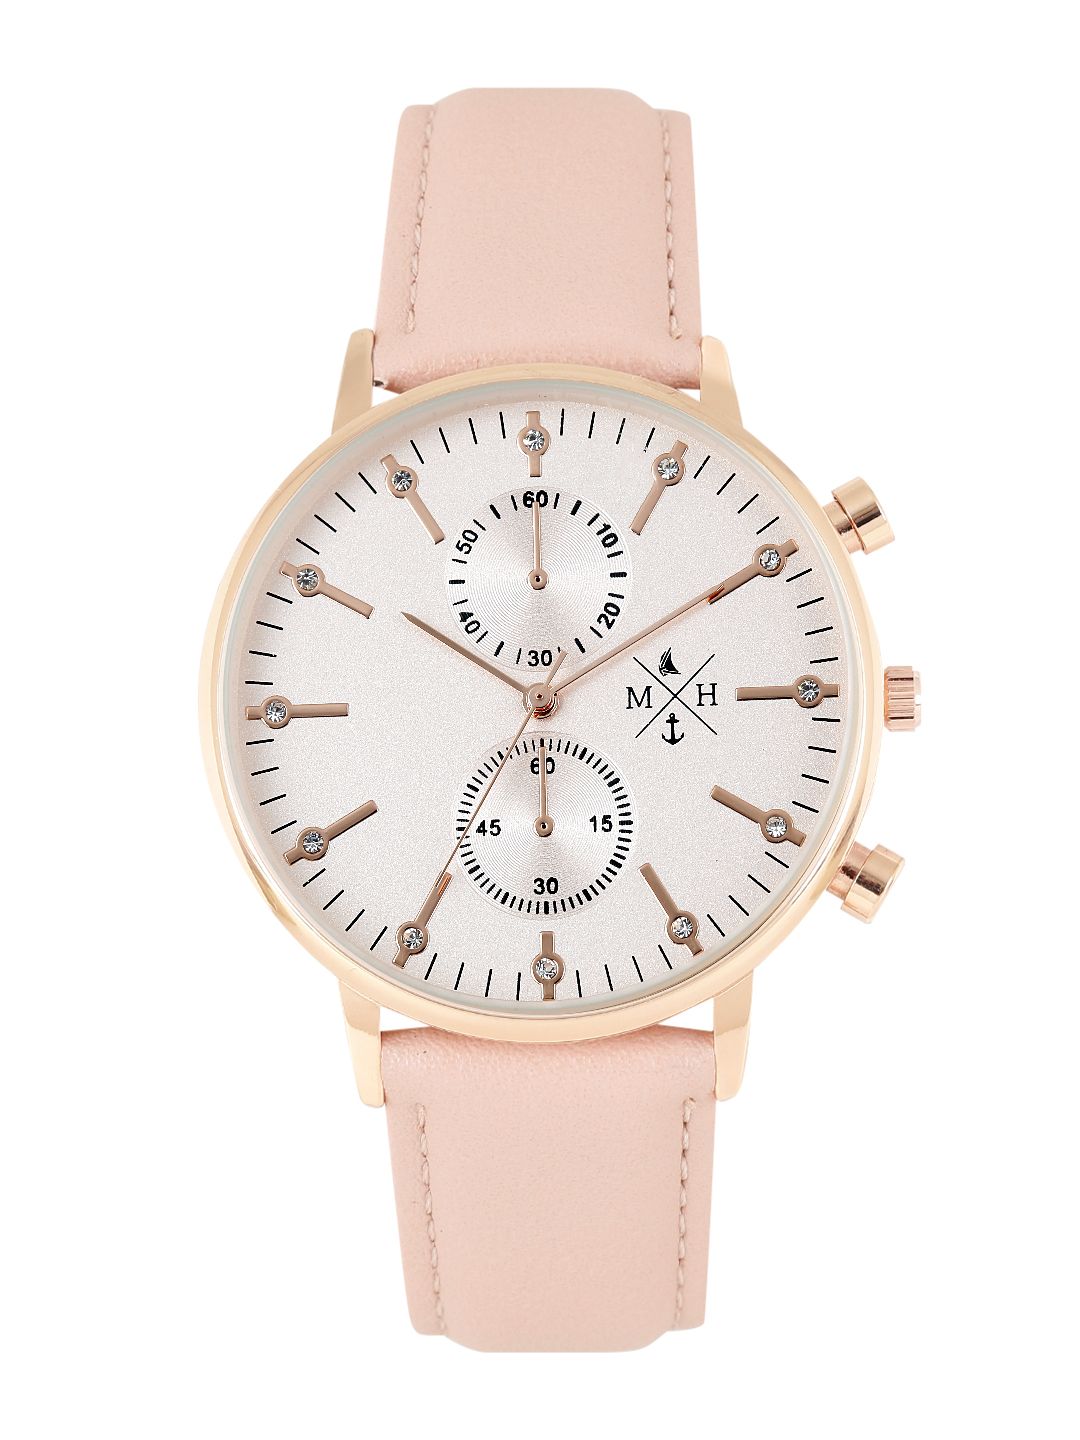 Mast & Harbour Unisex Peach-Coloured Analogue Watch MFB-PN-SNT-C01 Price in India